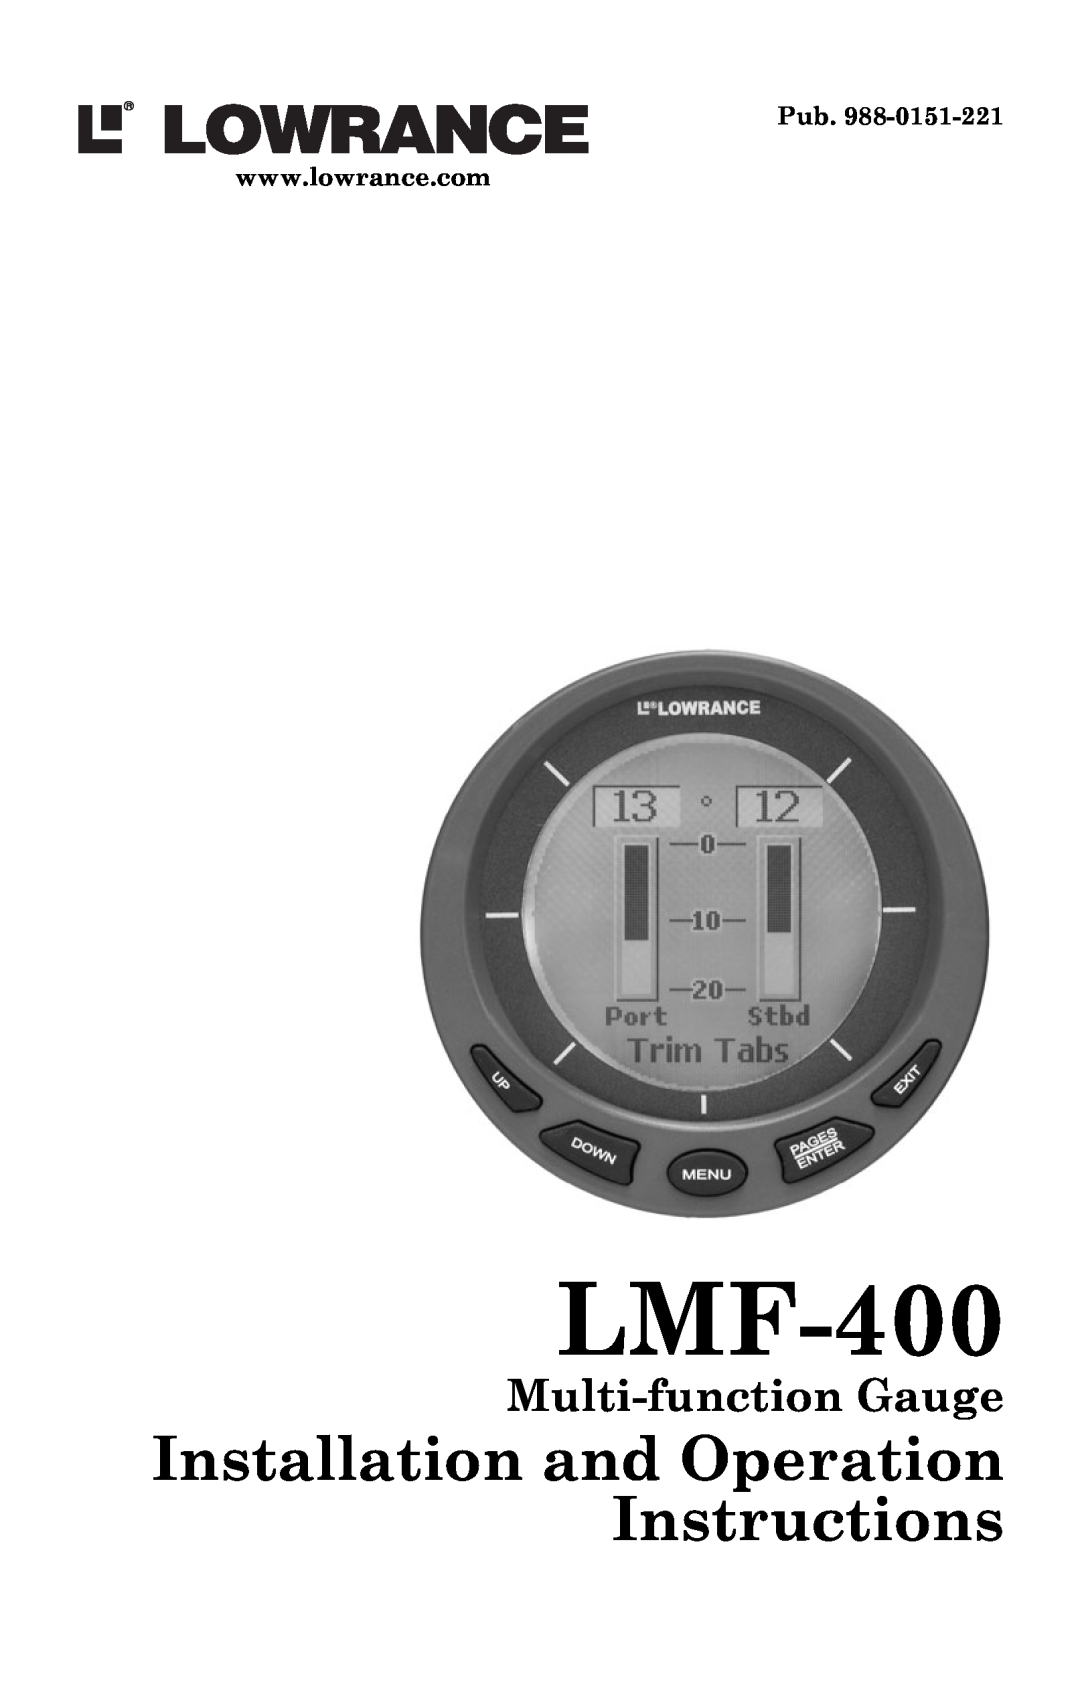 Lowrance electronic LMF-400 manual Multi-function Gauge, Installation and Operation Instructions 